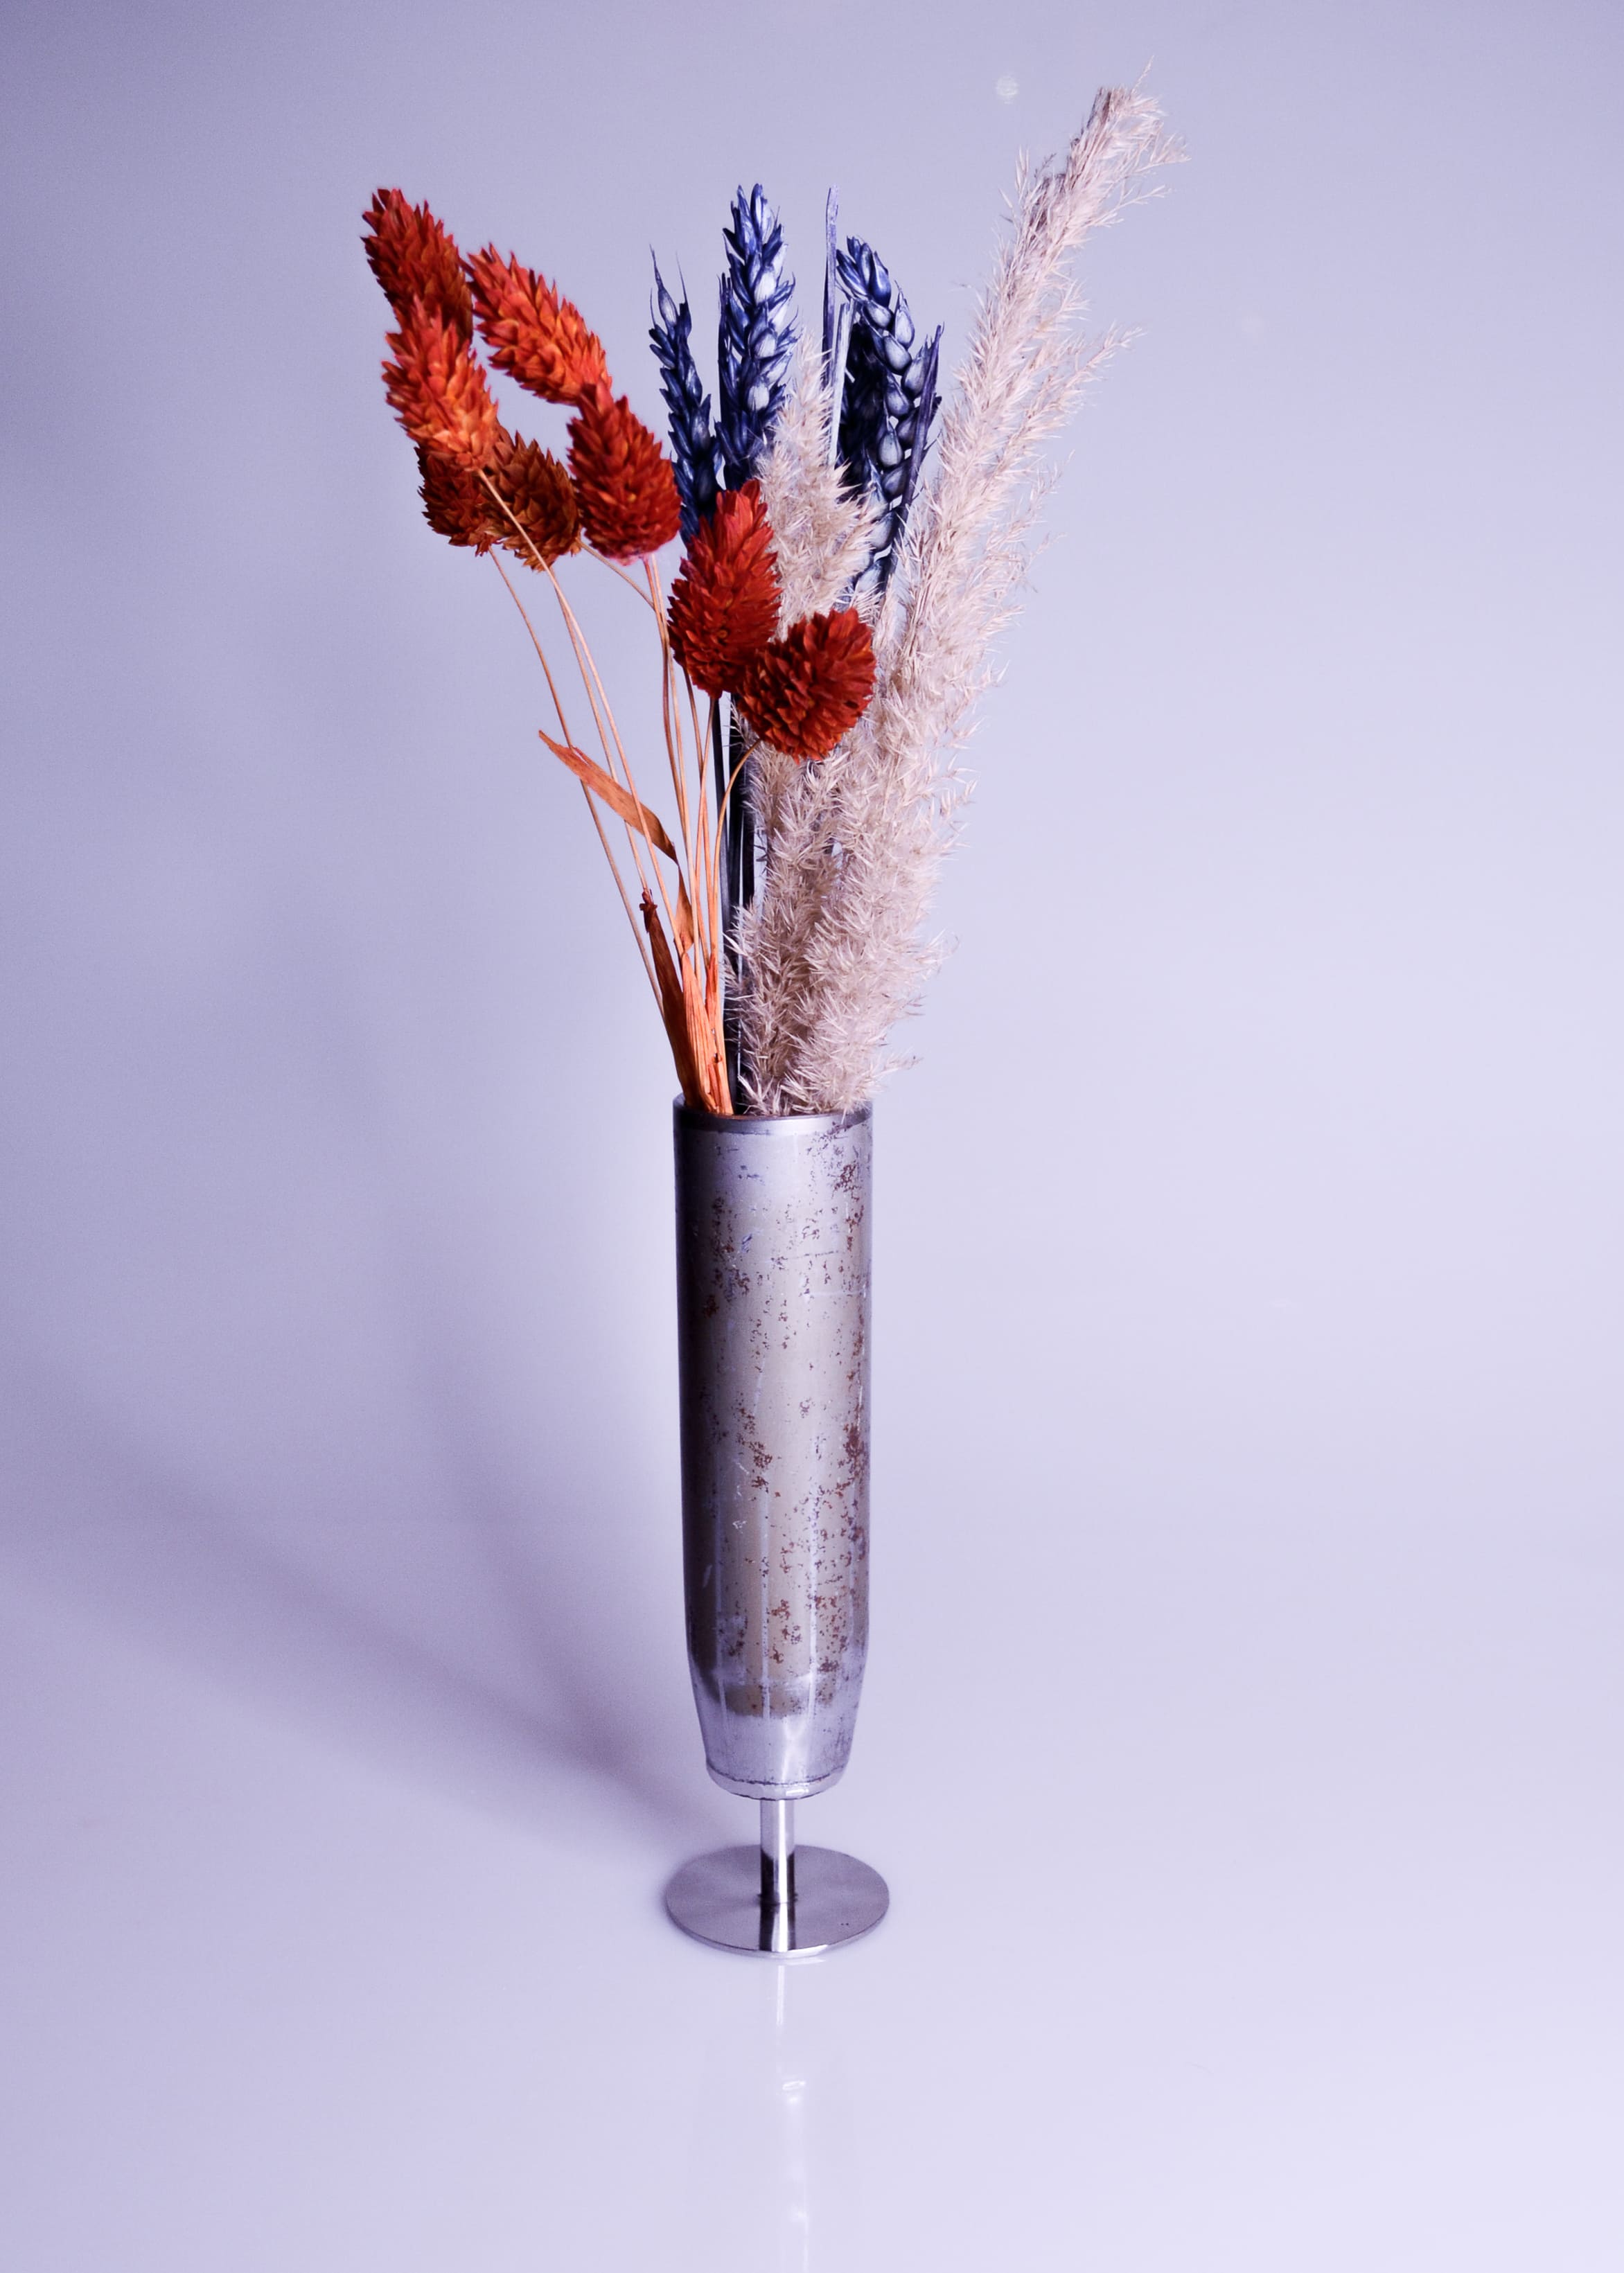 A vase made of a combat shell